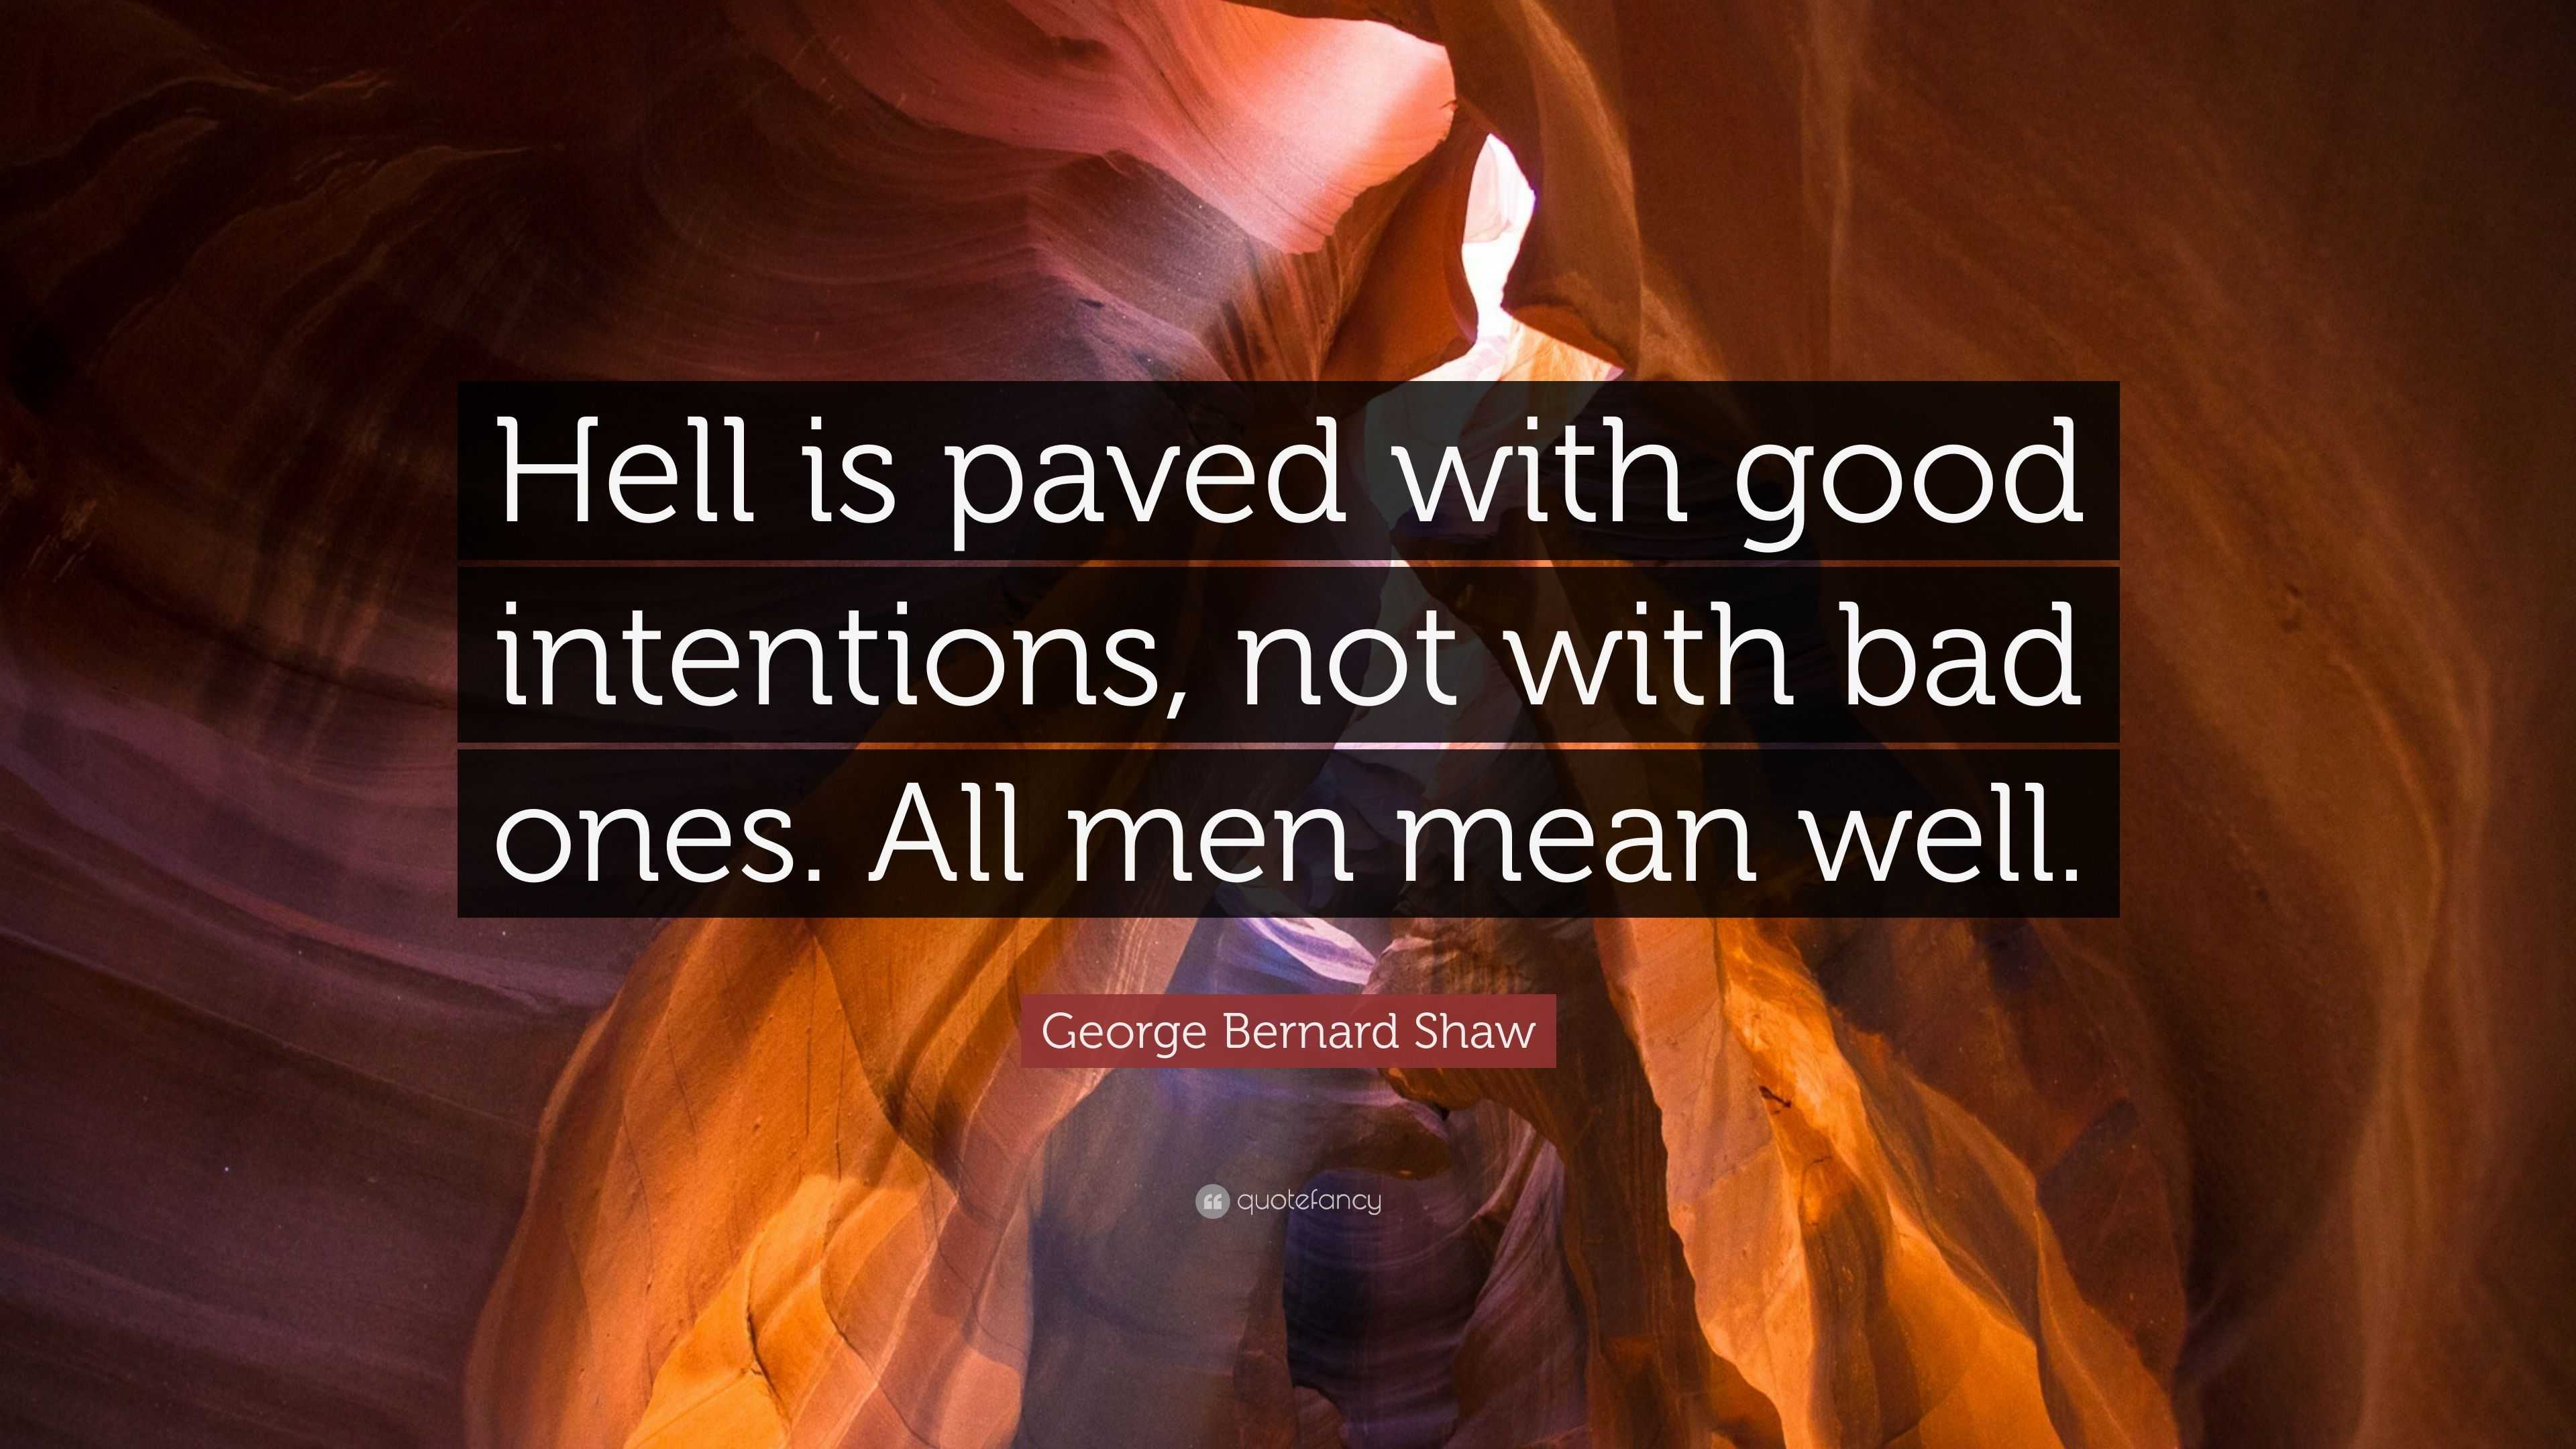 So to hell with good intentions! — THE BOYS ARE BACK IN TOWN TO